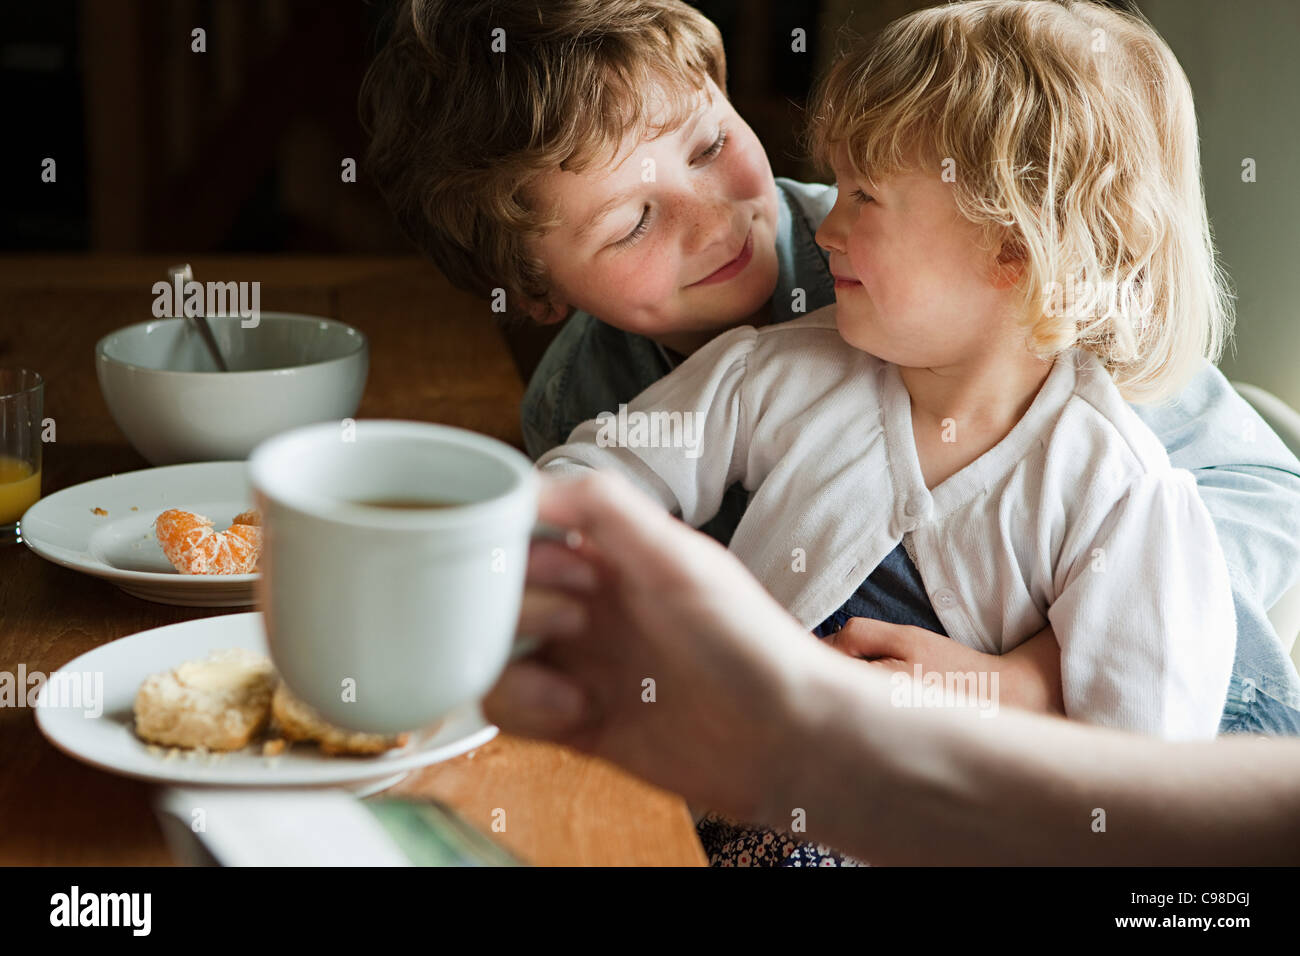 Brother and sister having breakfast Stock Photo